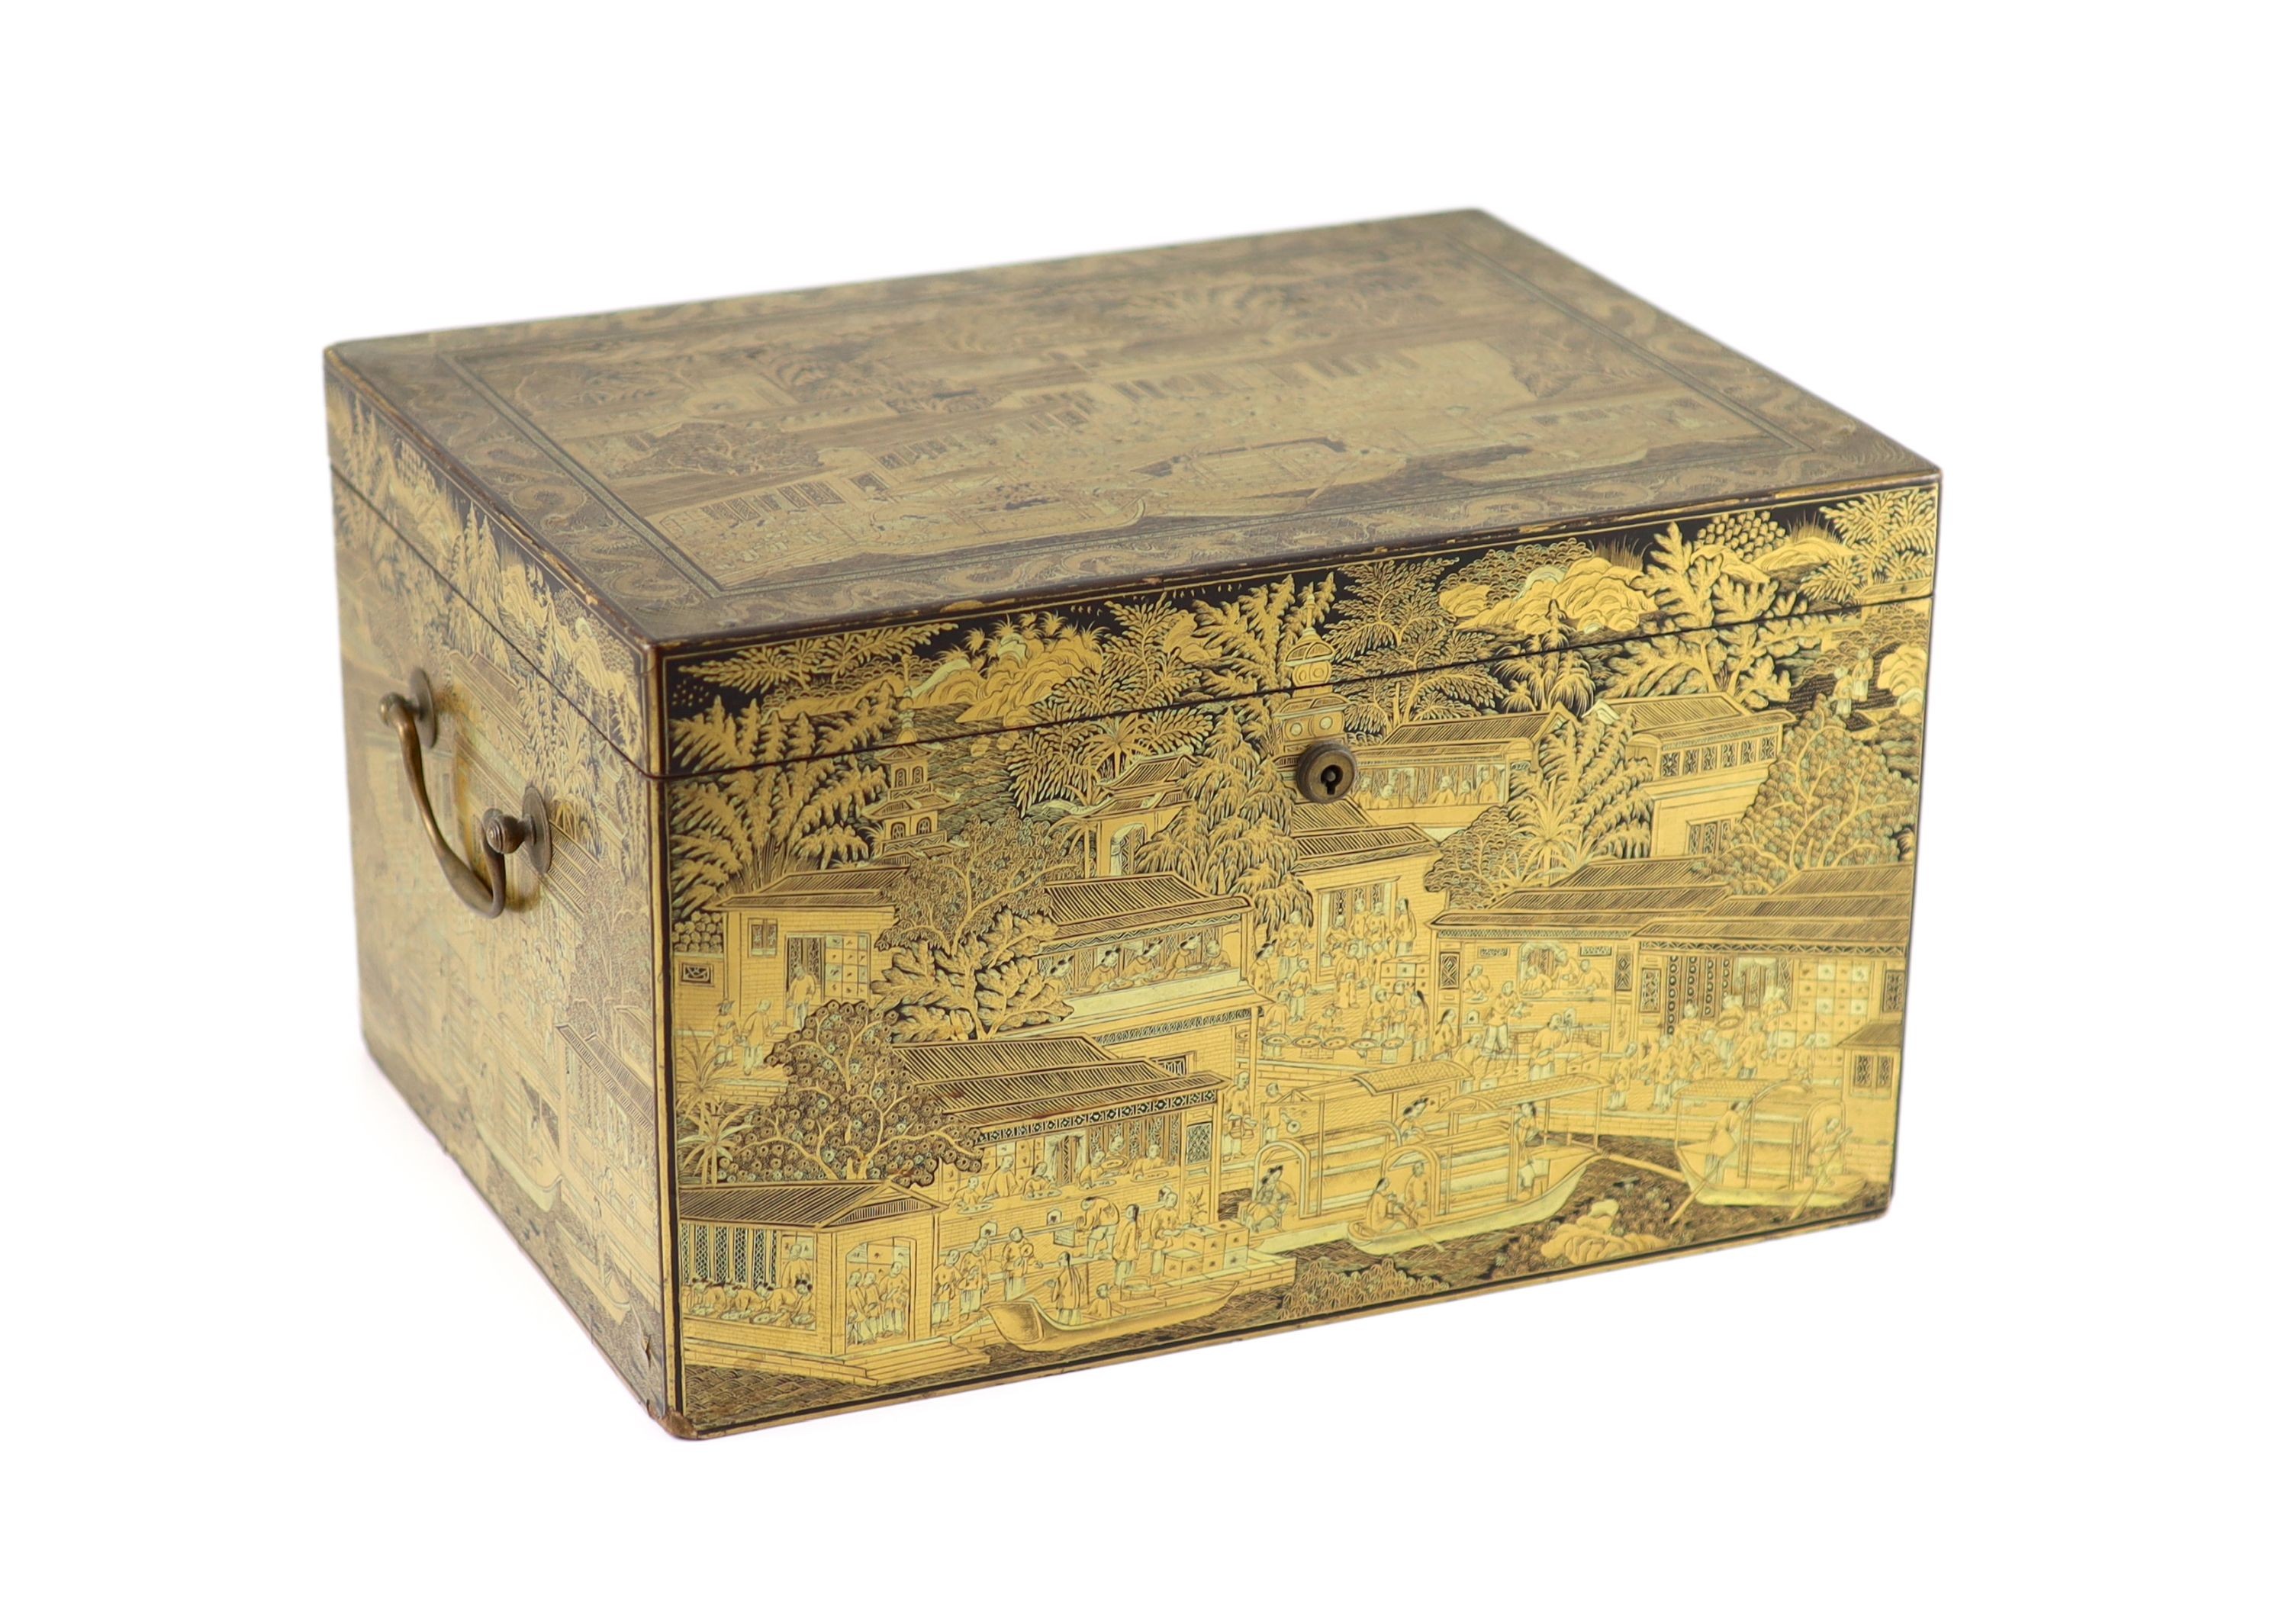 A Chinese export gilt decorated black lacquer tea chest, early 19th century,typically decorated with